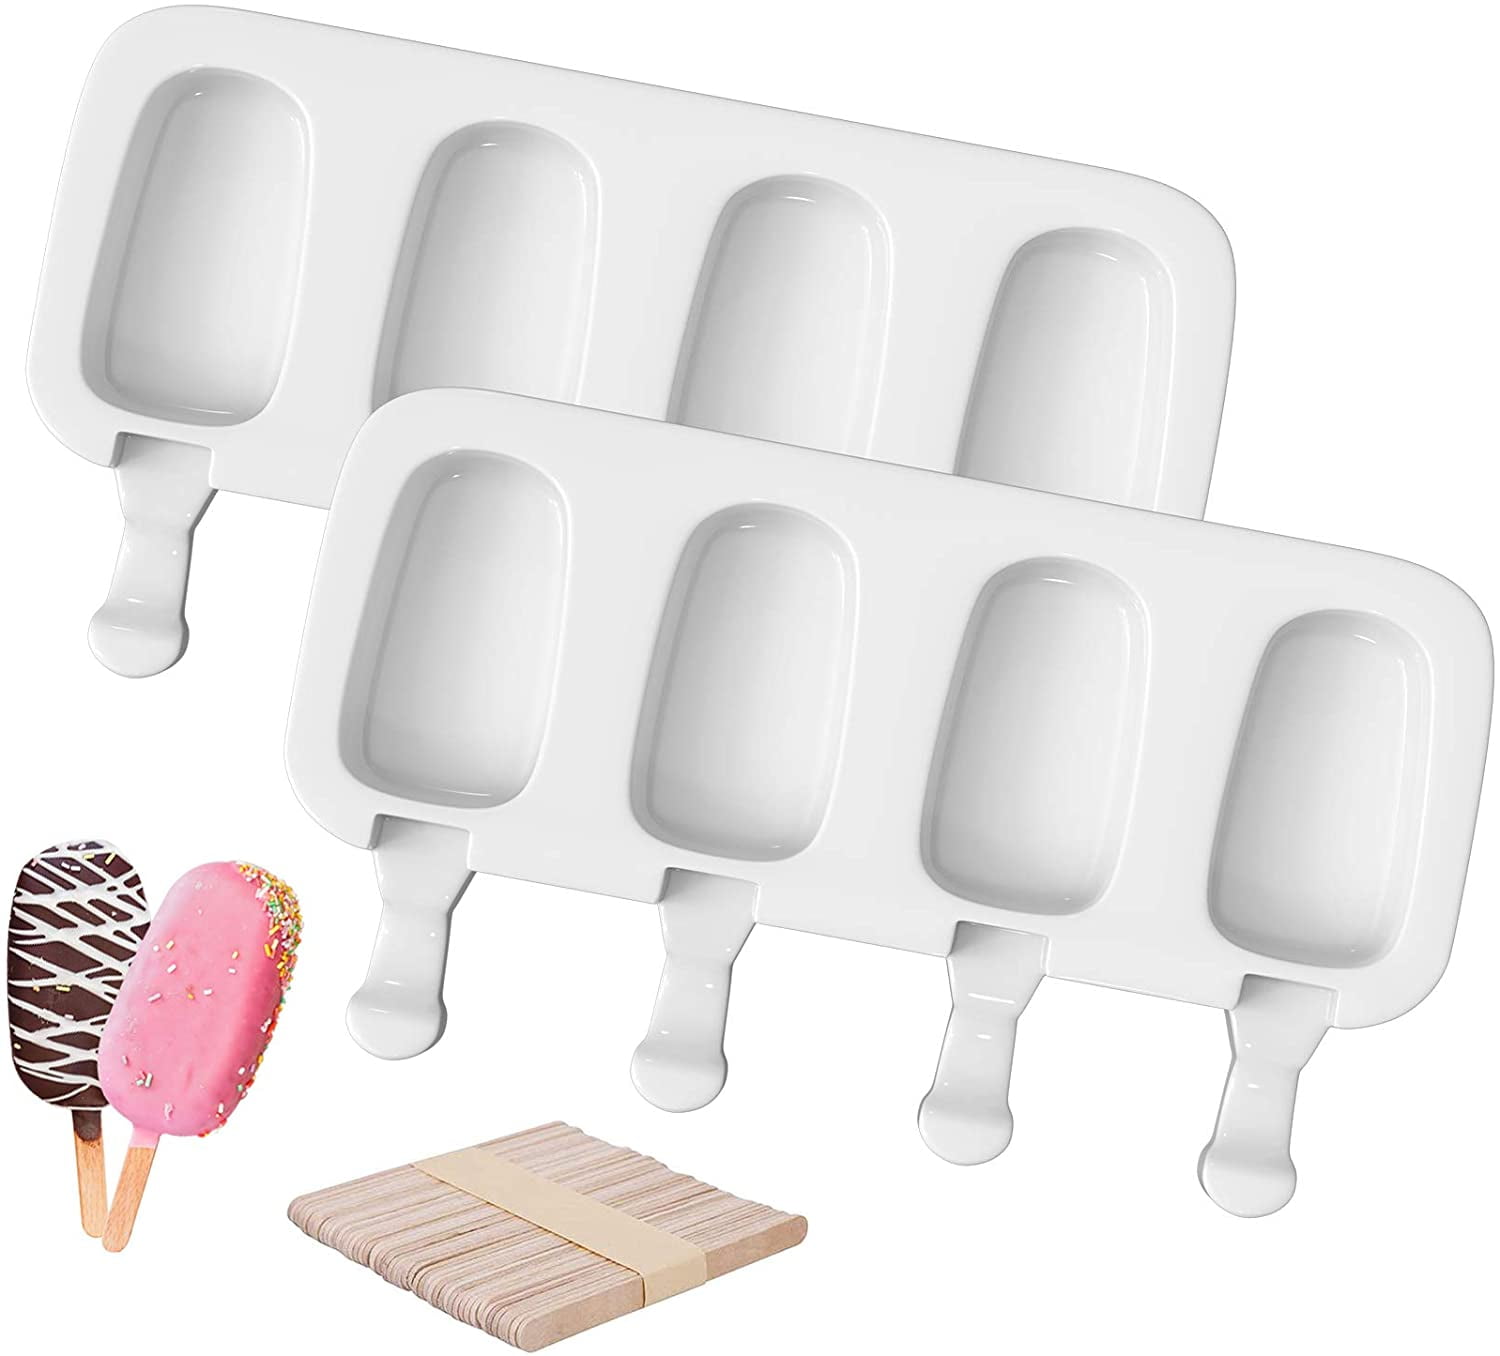 Ice Pop Molds Silicone Popsicle Molds 4 Cavities Homemade Ice Cream Mold  Heart Ice Cream Mold Reusable Soft Silicone,Silicone Popsicle Molds  Cake,Cakesicle Mold for DIY Ice Pops